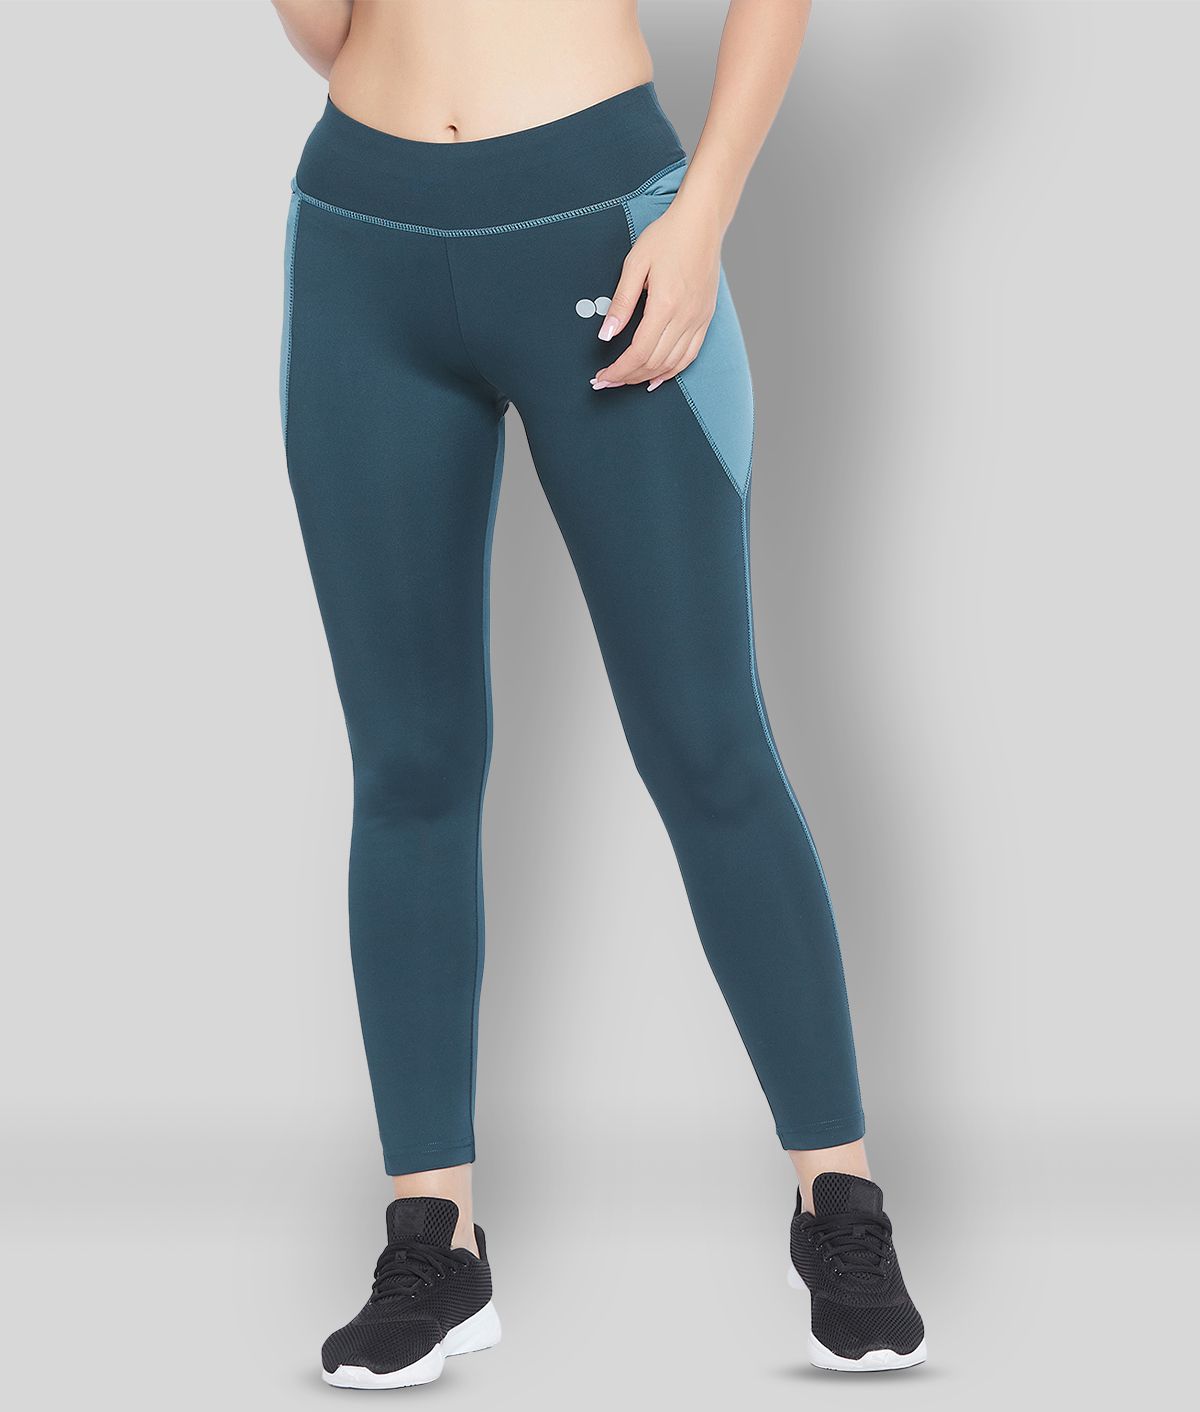 Clovia Blue Polyester Solid Tights - Single